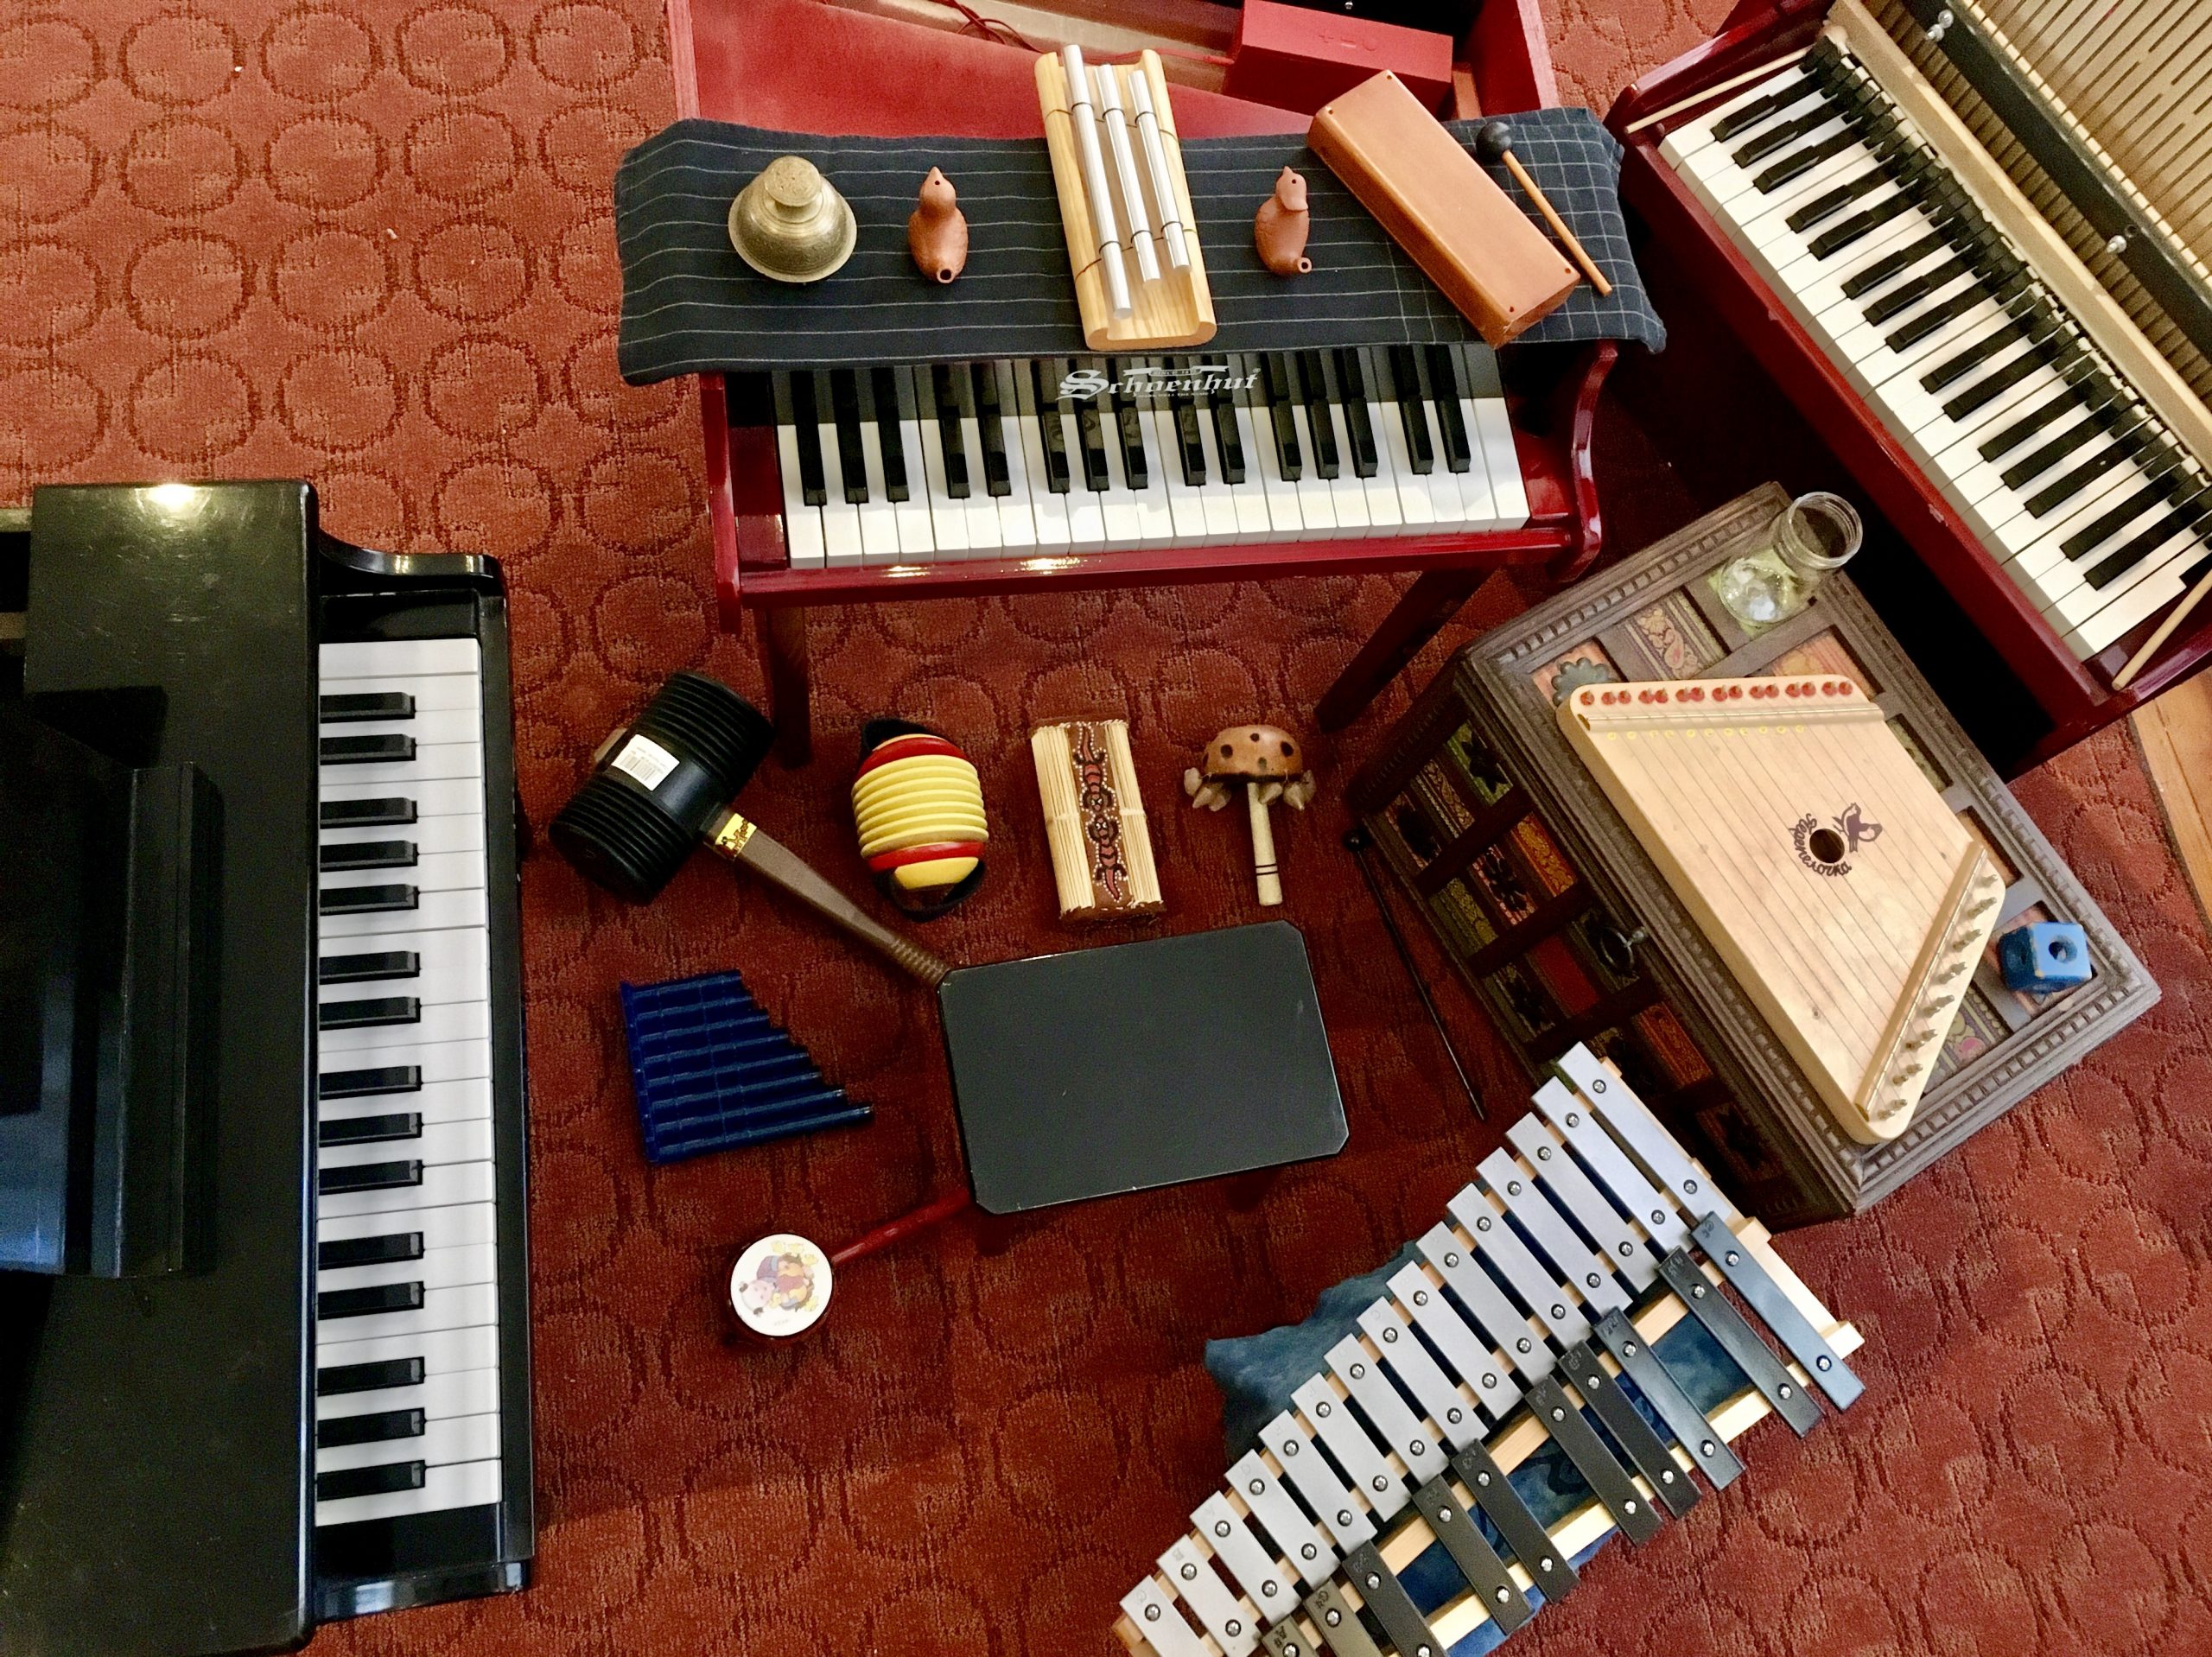 An array of toy keyboards, a toy zither, and a toy mallet instrument in a circle on the floor.